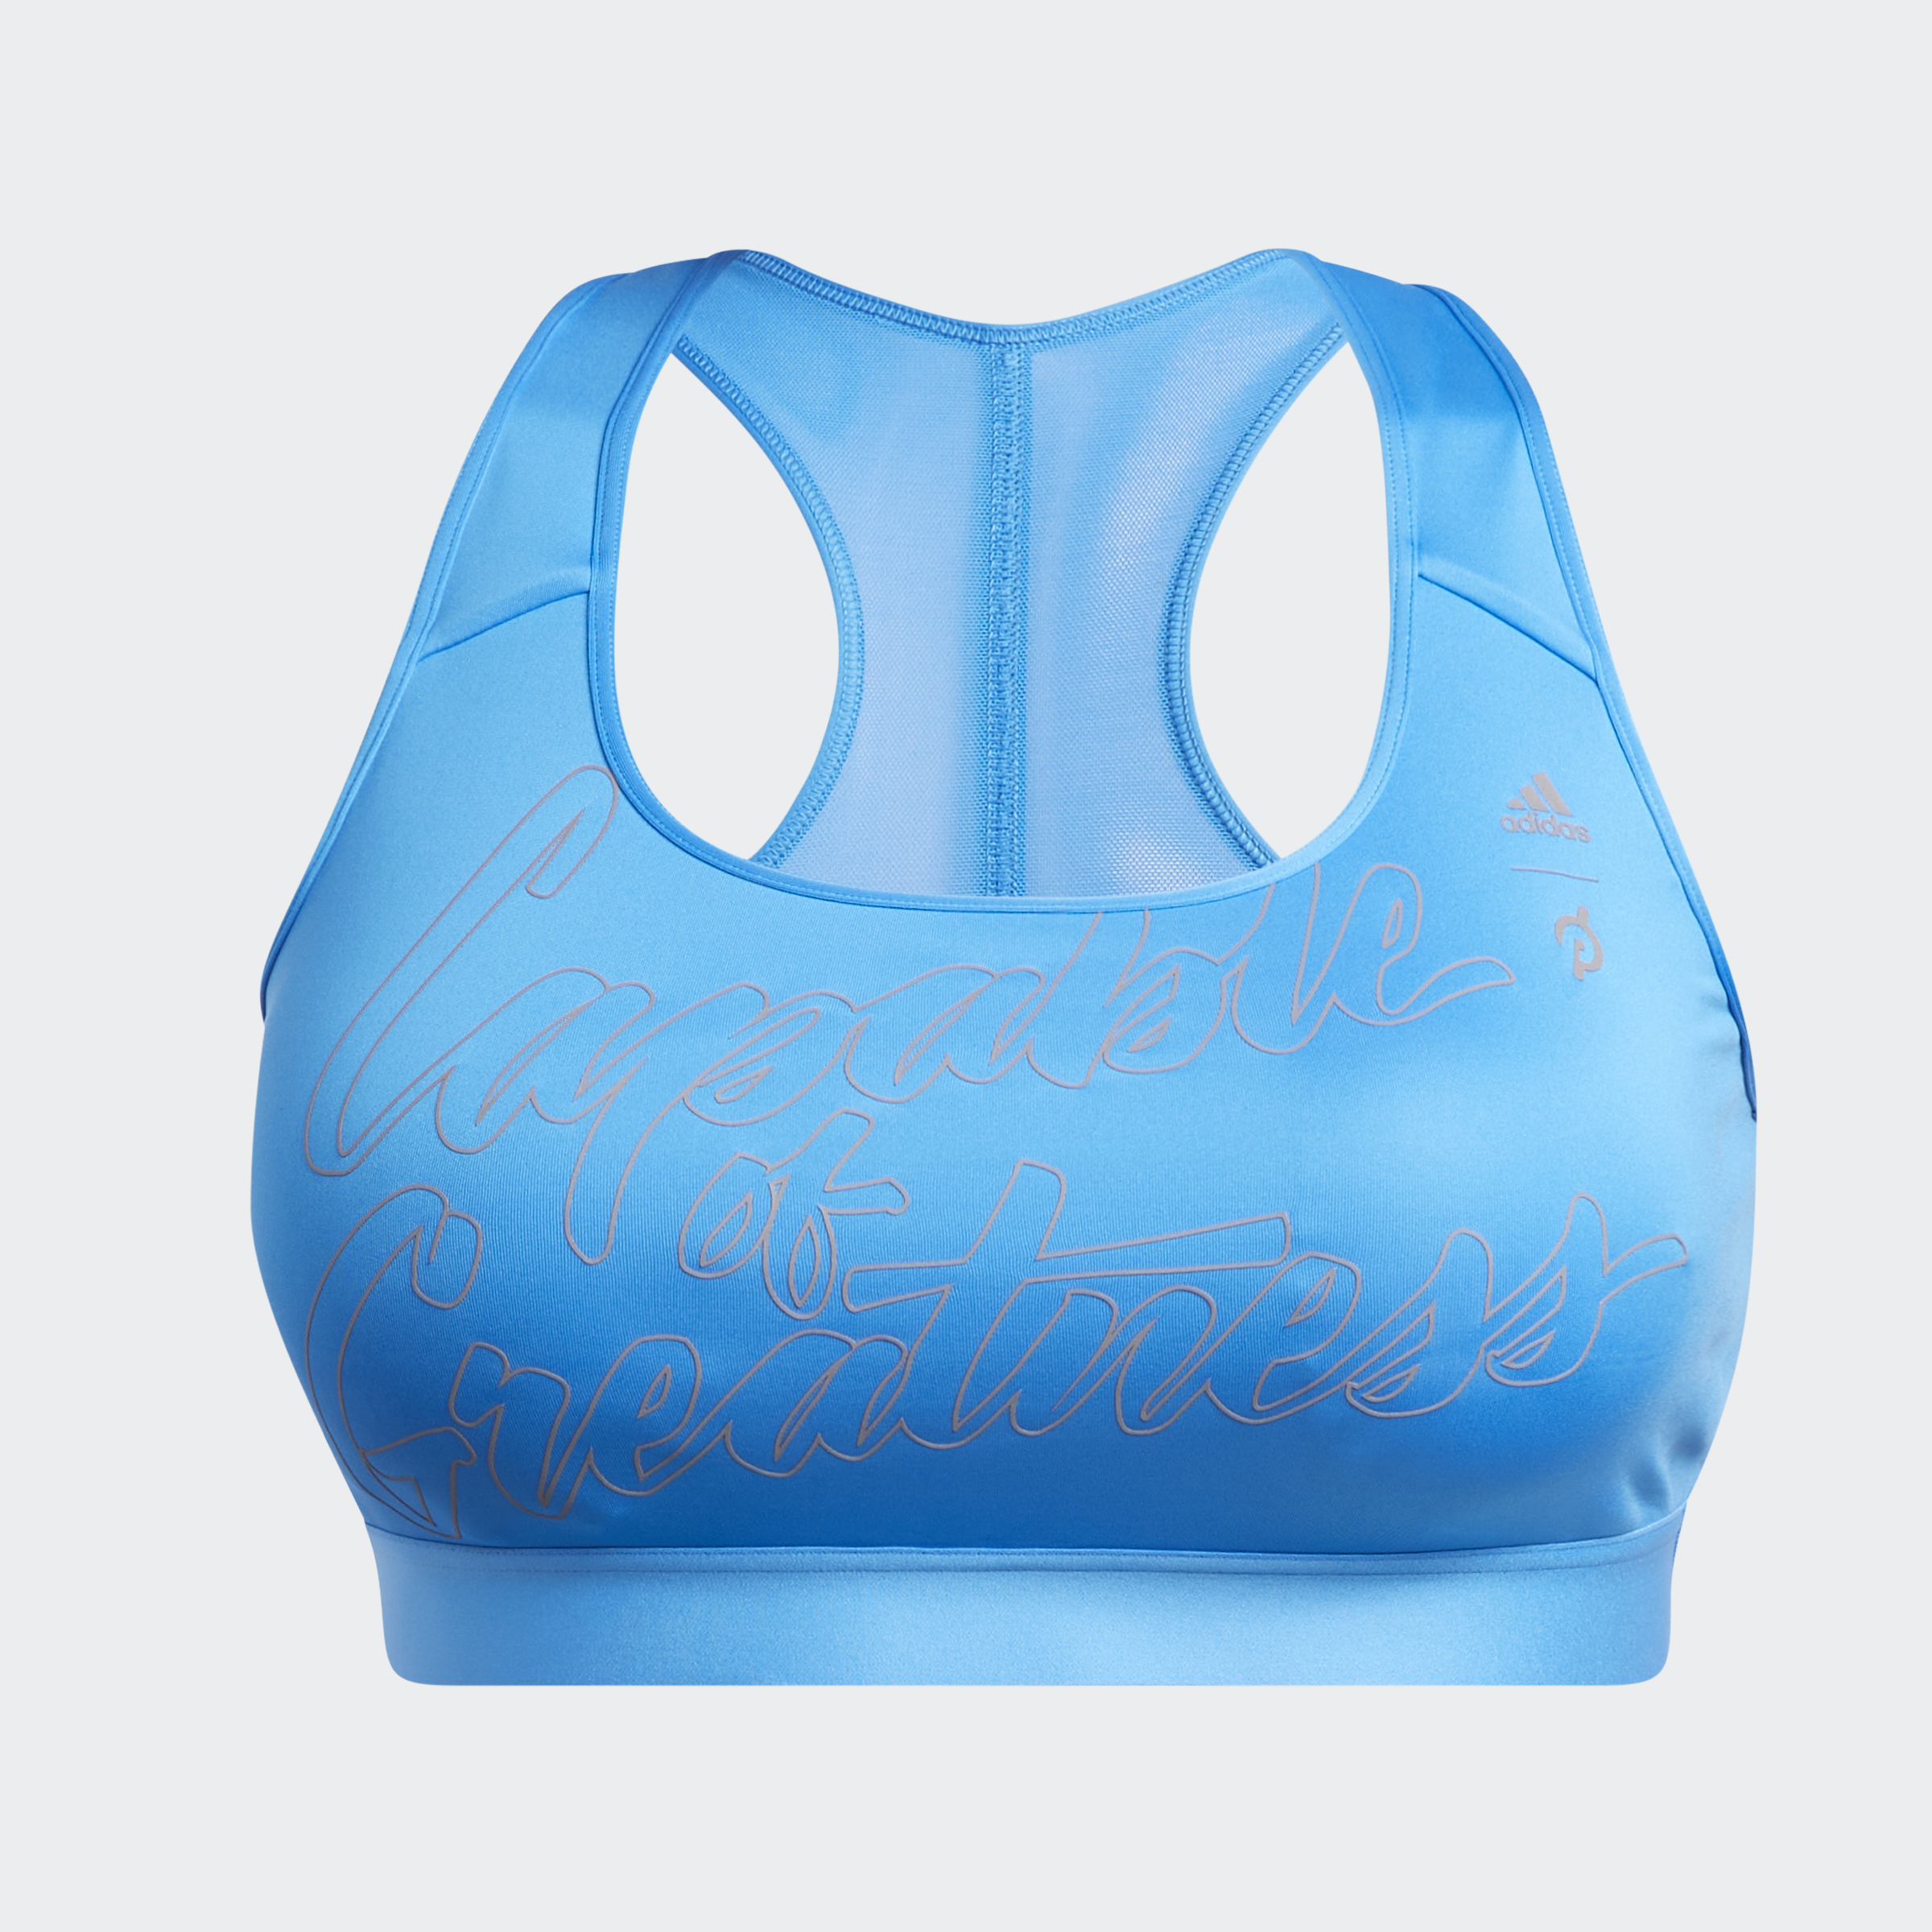 Adidas Capable of Greatness Bra (Plus Size) - HT9519